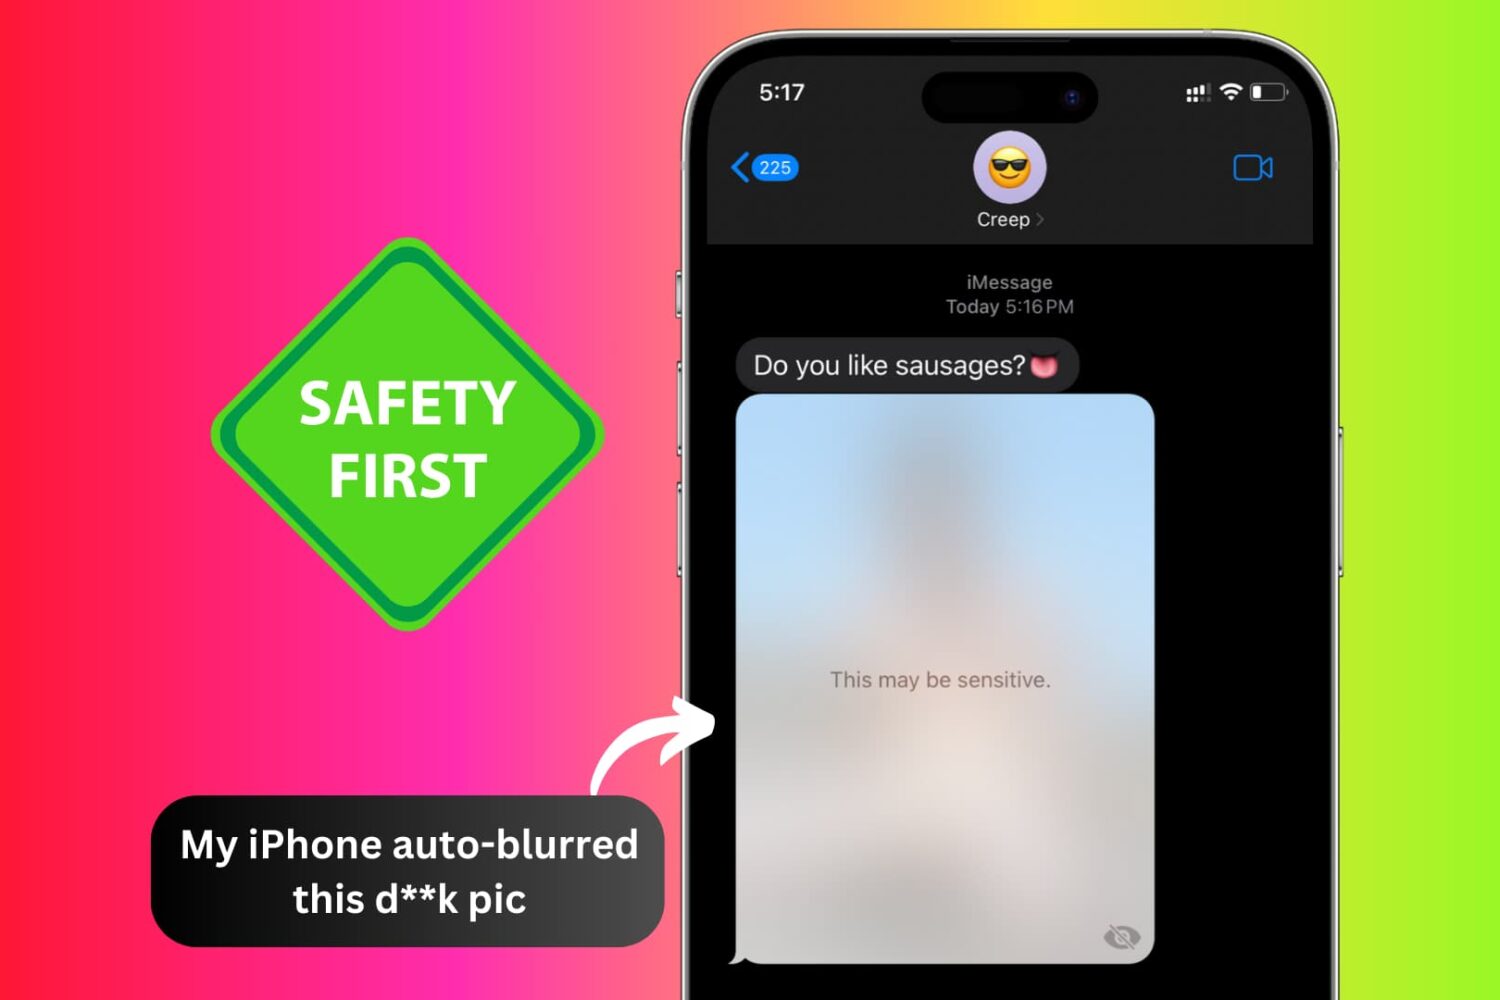 Unsolicited nude picture blurred in iPhone messages because of Apple's Communication Safety and Sensitive Content Warning feature